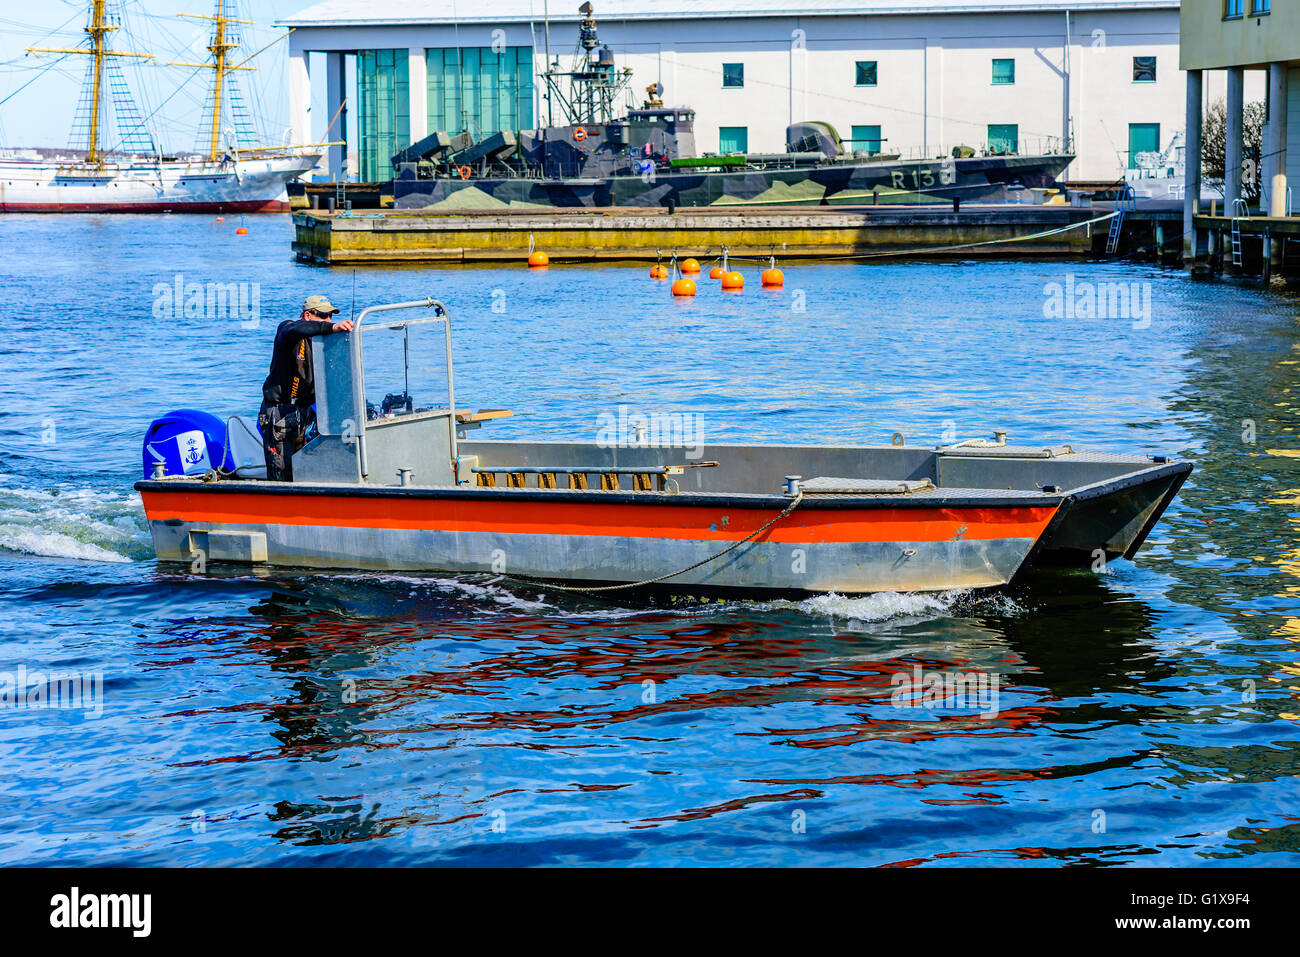 Karlskrona, Sweden - May 3, 2016: Male person driving an open motorboat through the canal with the maritime museum in the backgr Stock Photo